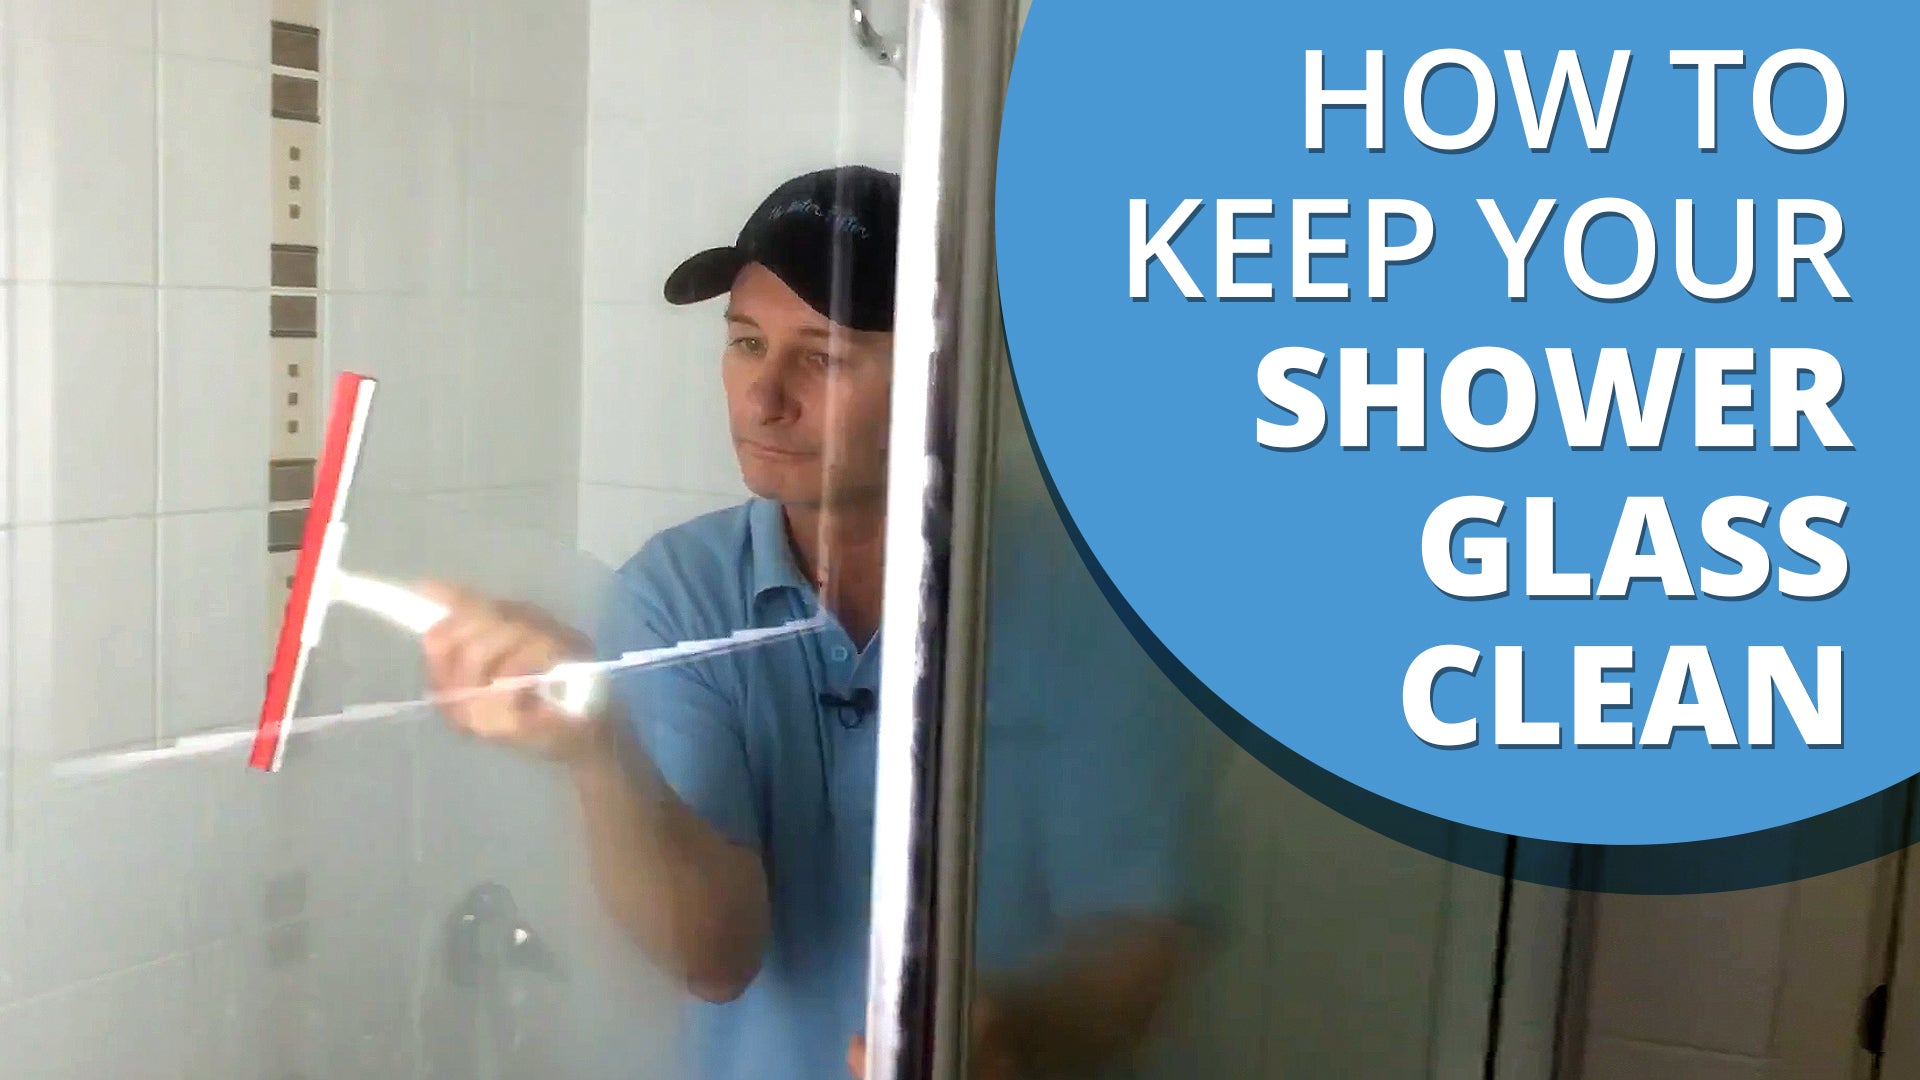 How To Remove Hard Water Stains on Glass Shower Doors With